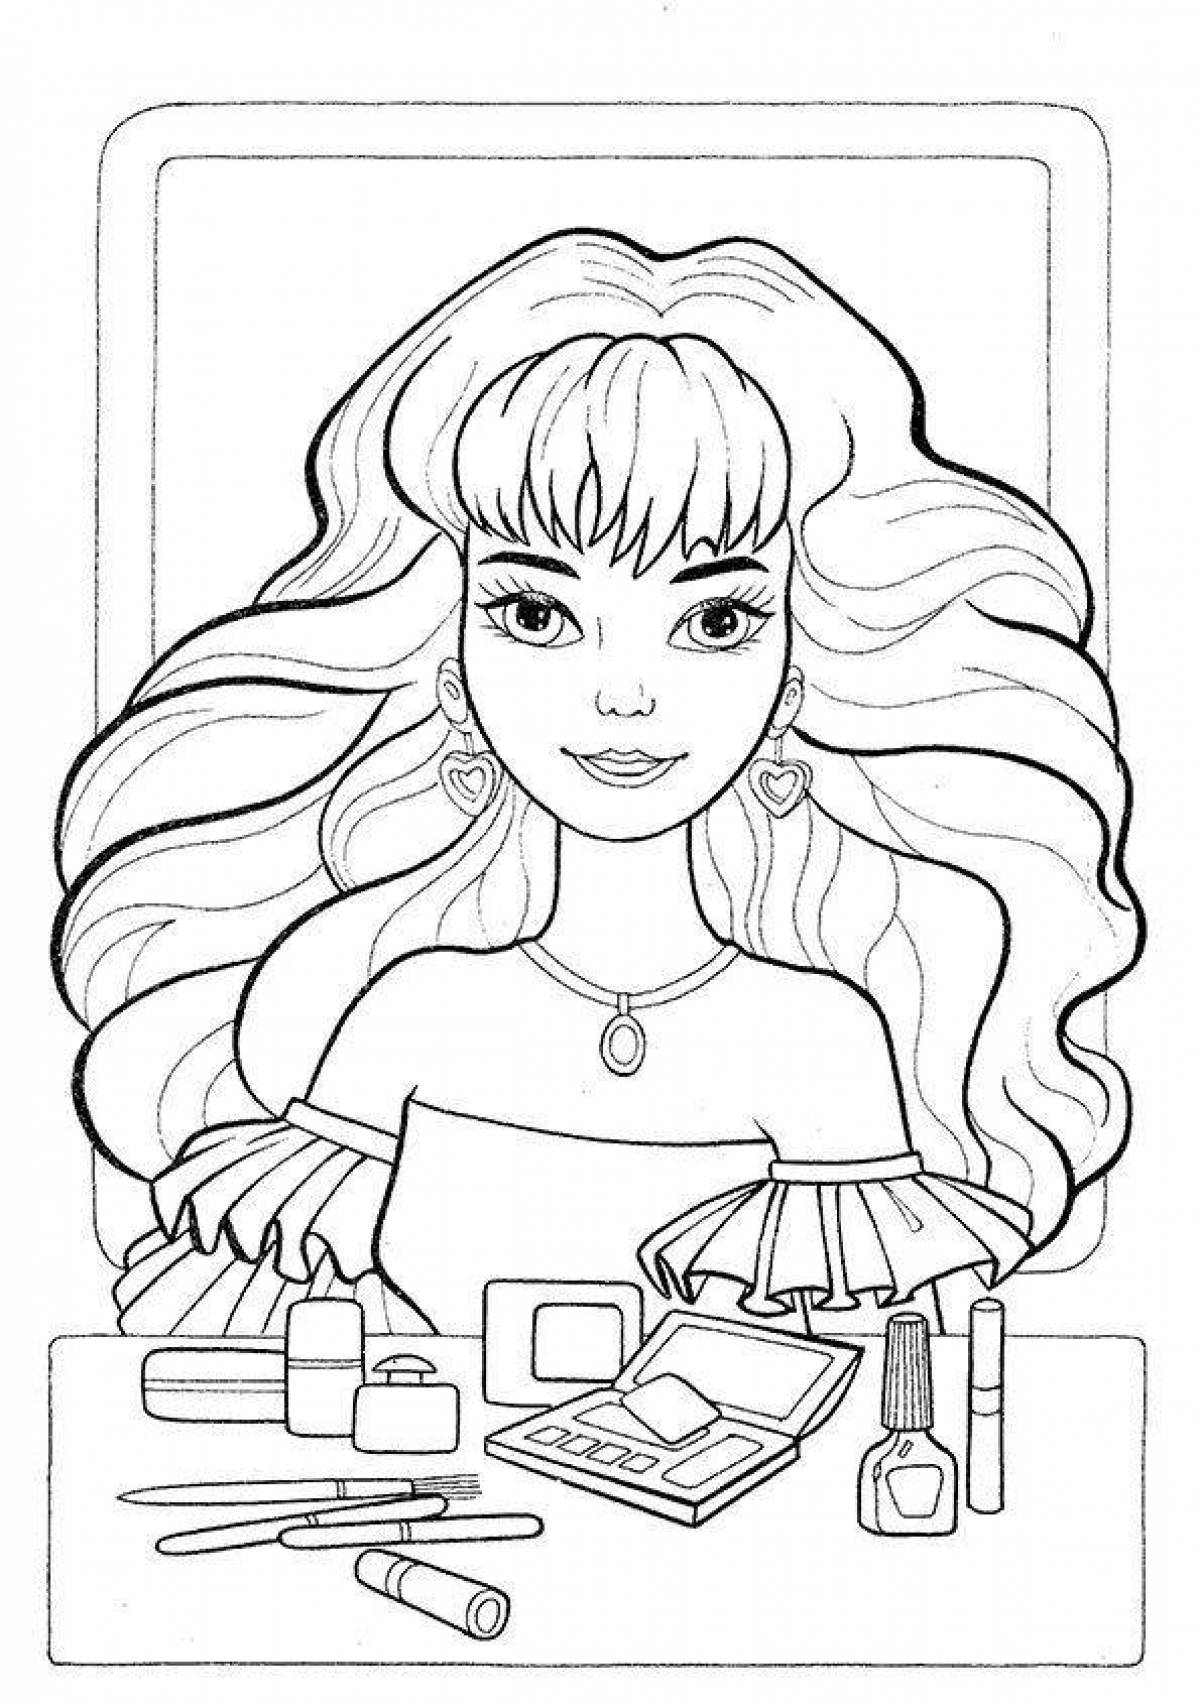 Bright beauty salon coloring page